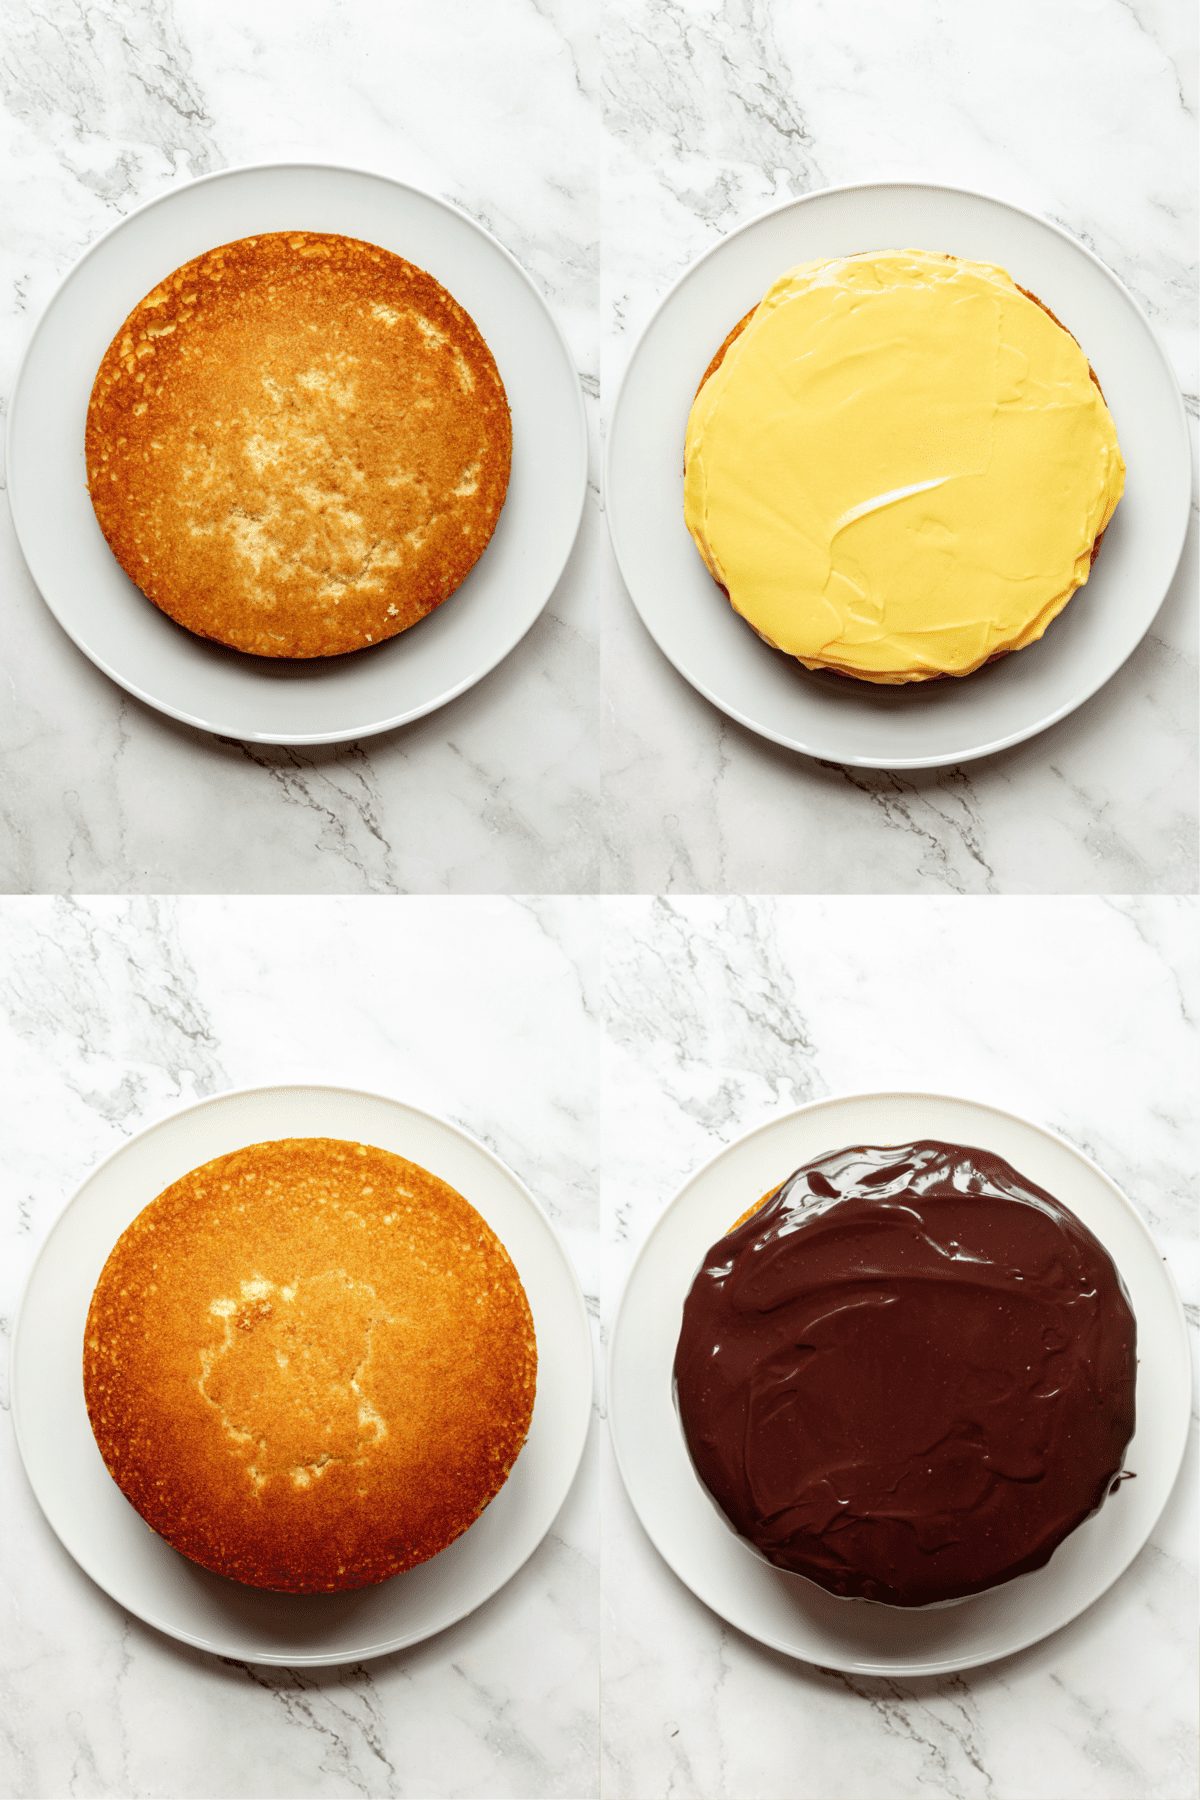 steps 5-8 to make boston cream pie cake; steps showing how to frost and assemble boston cream pie cake